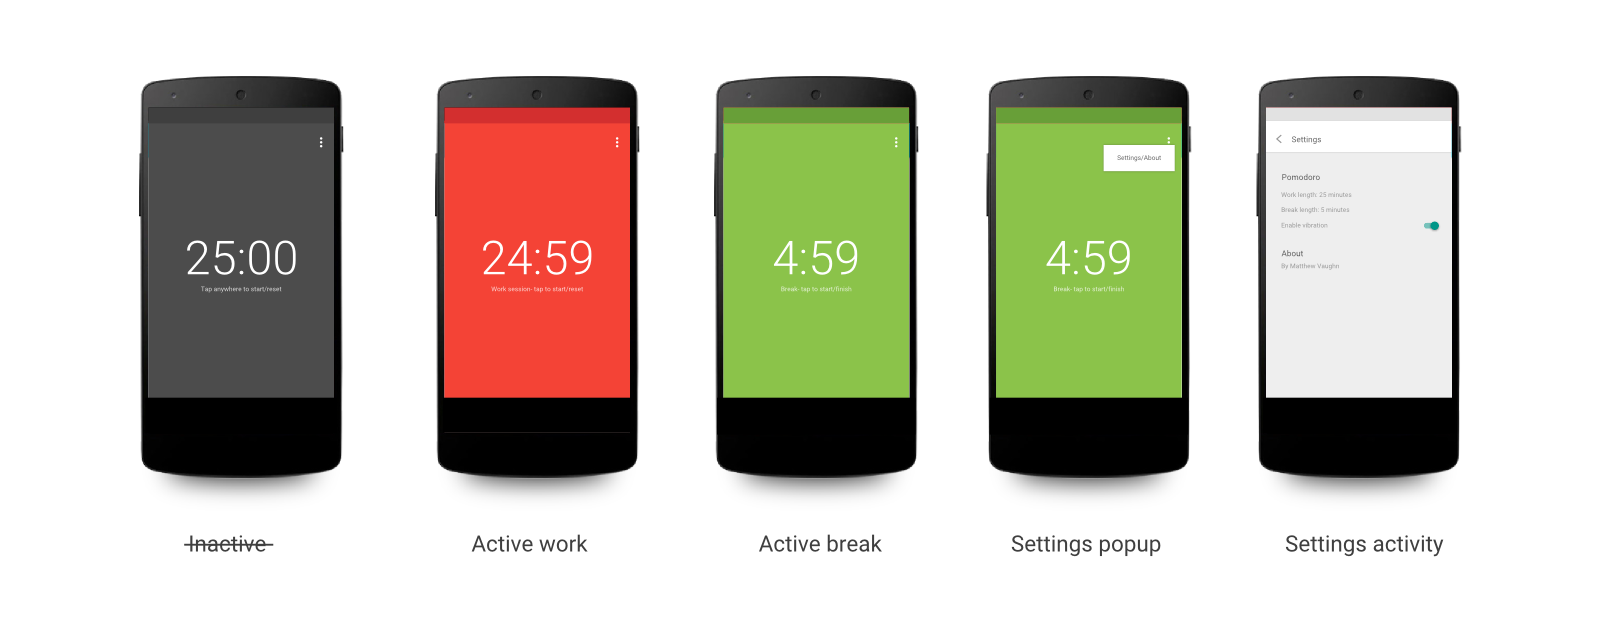 The state mockups for the app